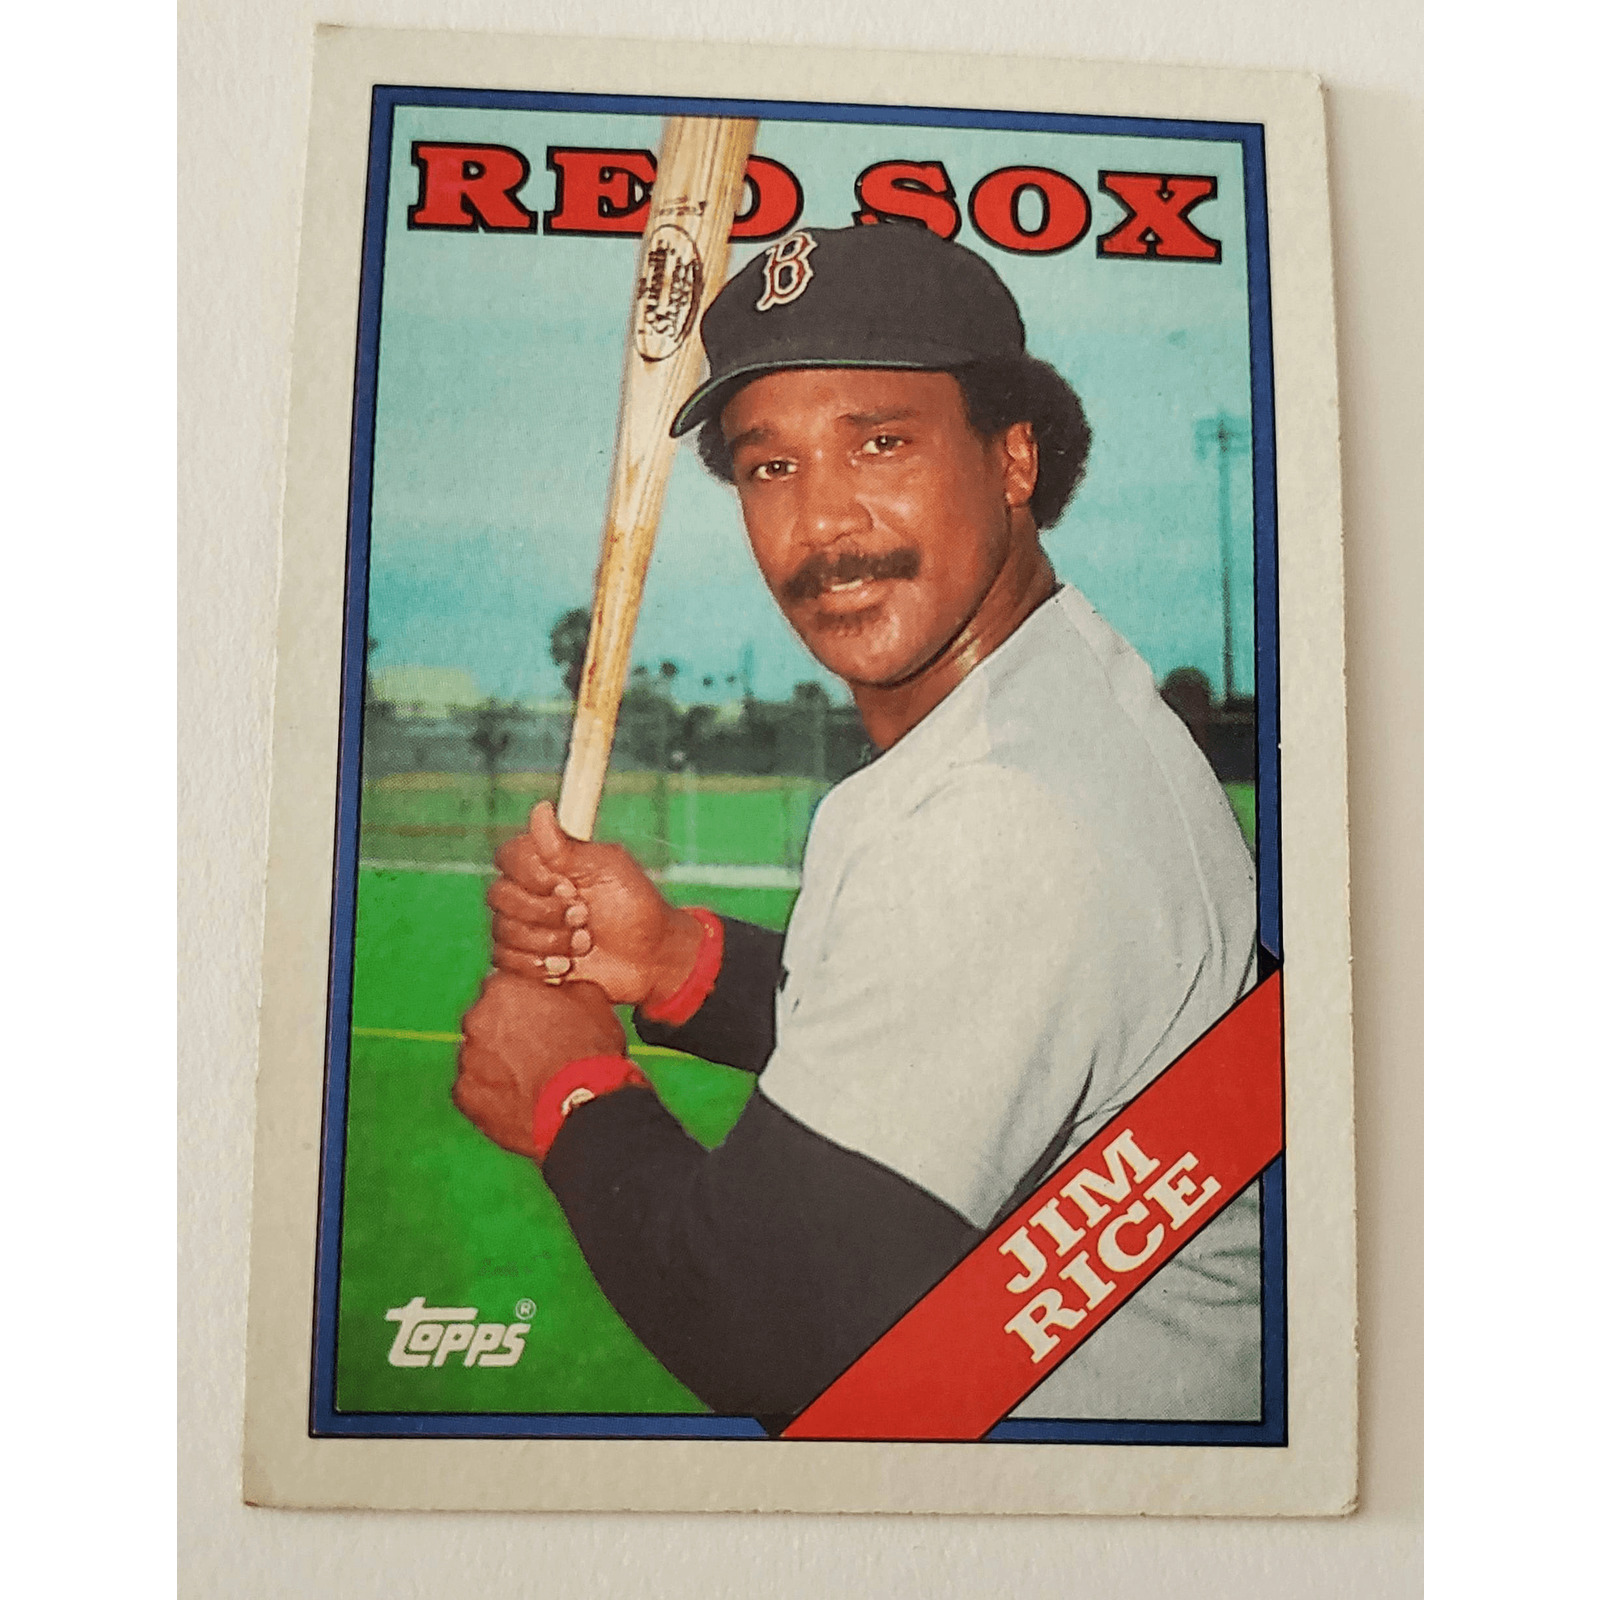 Red Sox Jim Rice by Topps card. Sports Cards. Trading Card. Vintage. Trade. Red